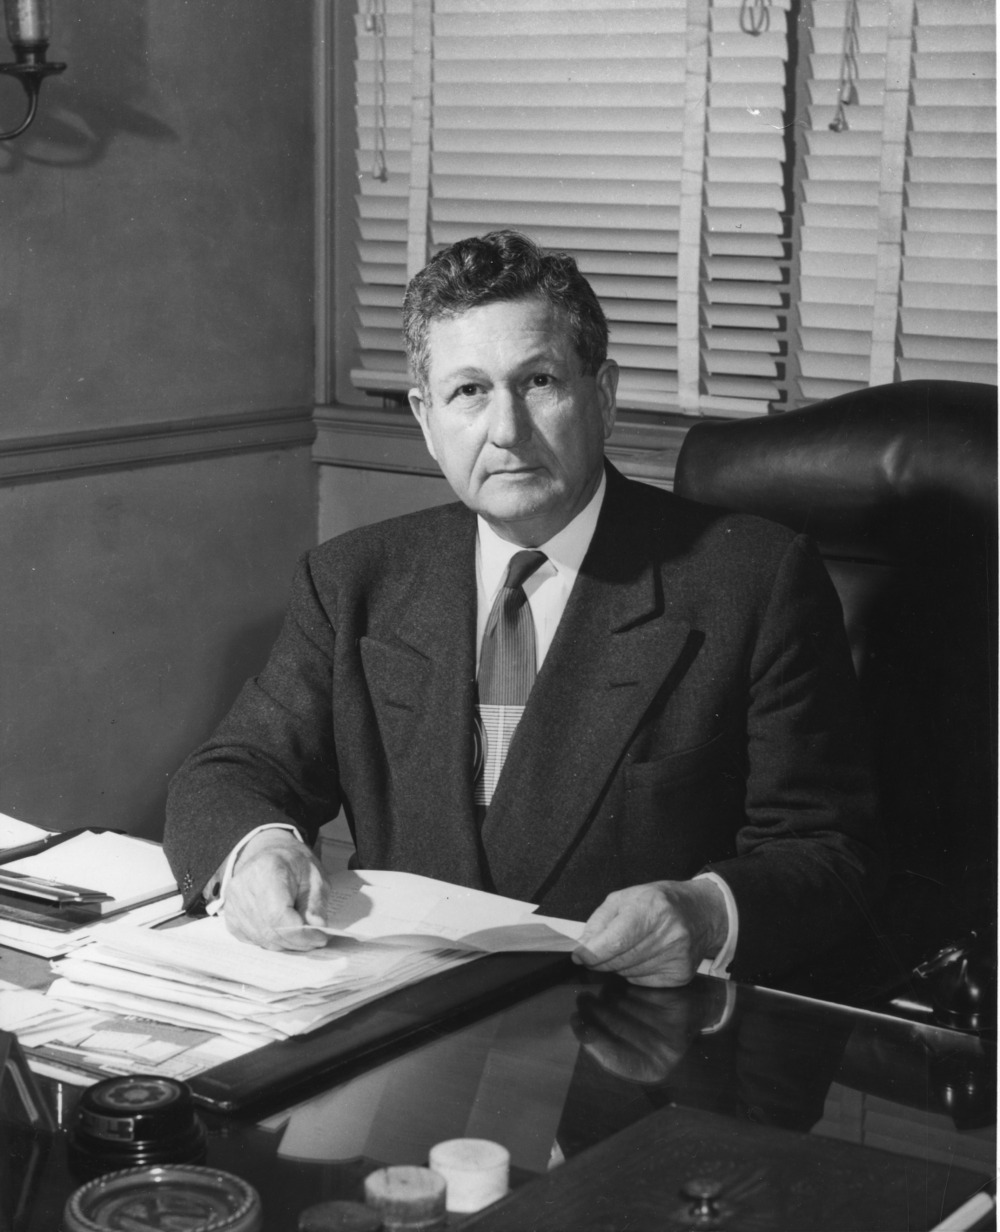 A black and white photograph of Chancellor John W. Harrelson at his desk.